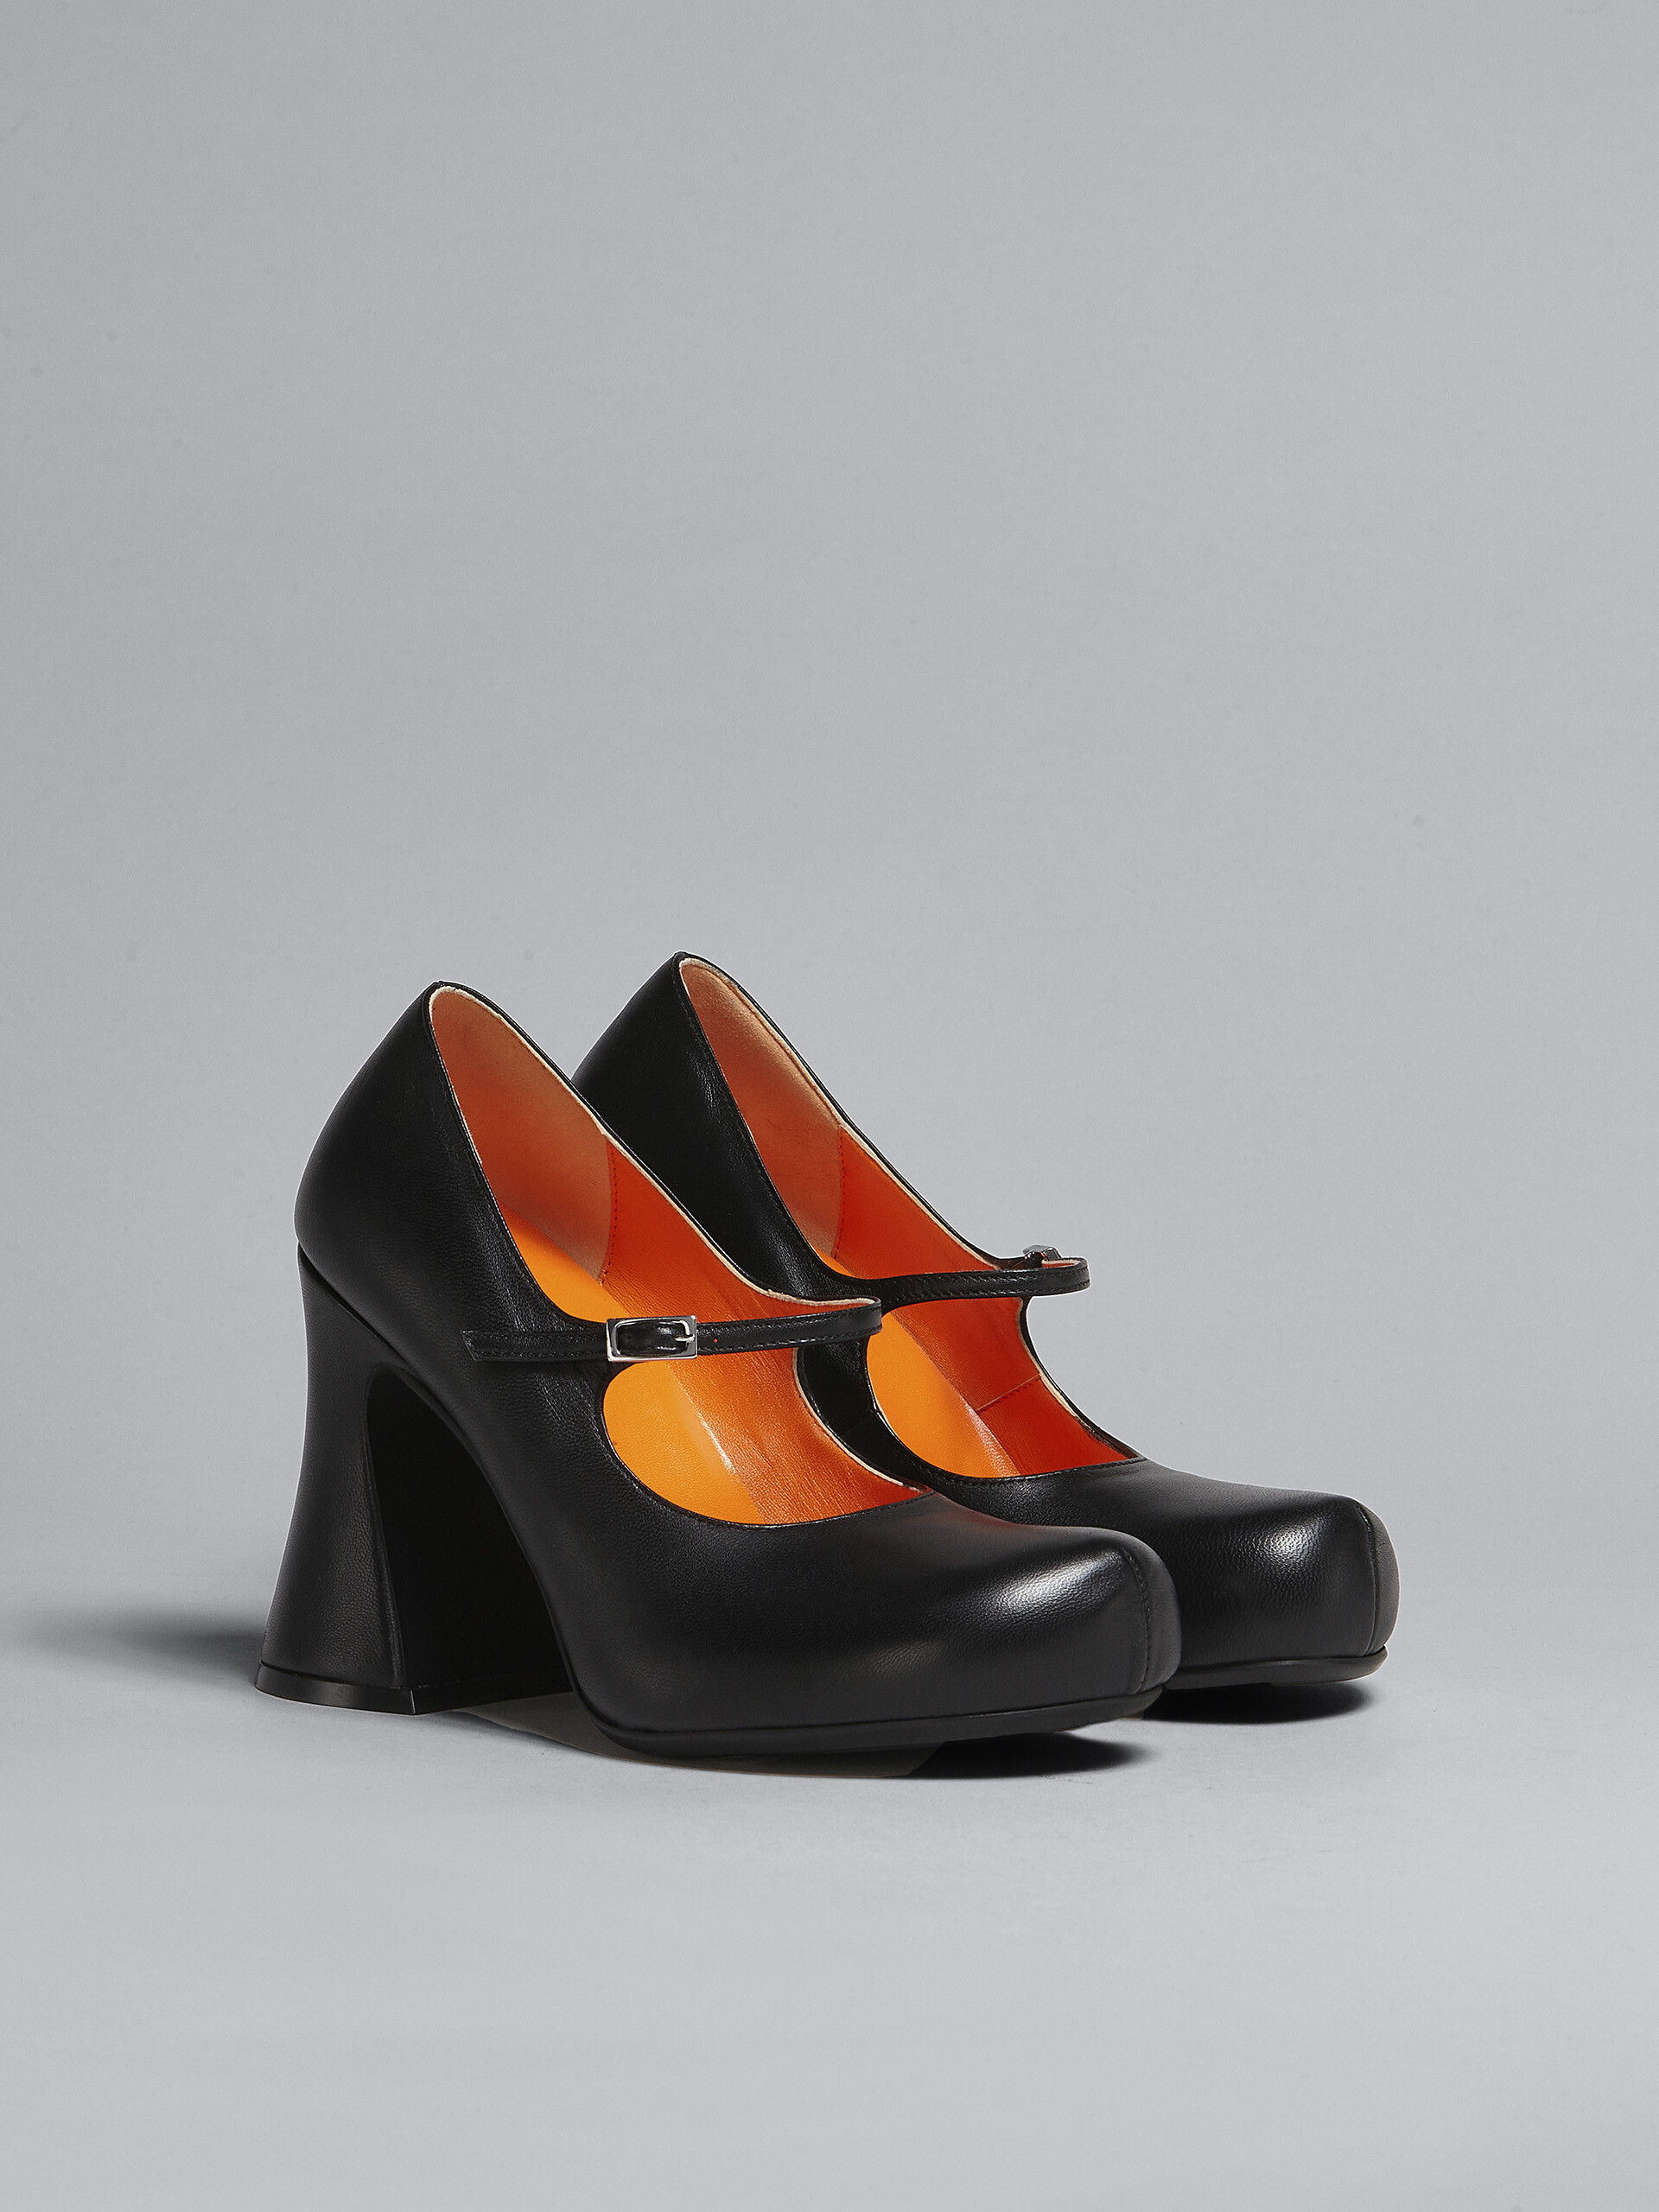 Black leather Mary Jane pump - Sneakers - Image 2